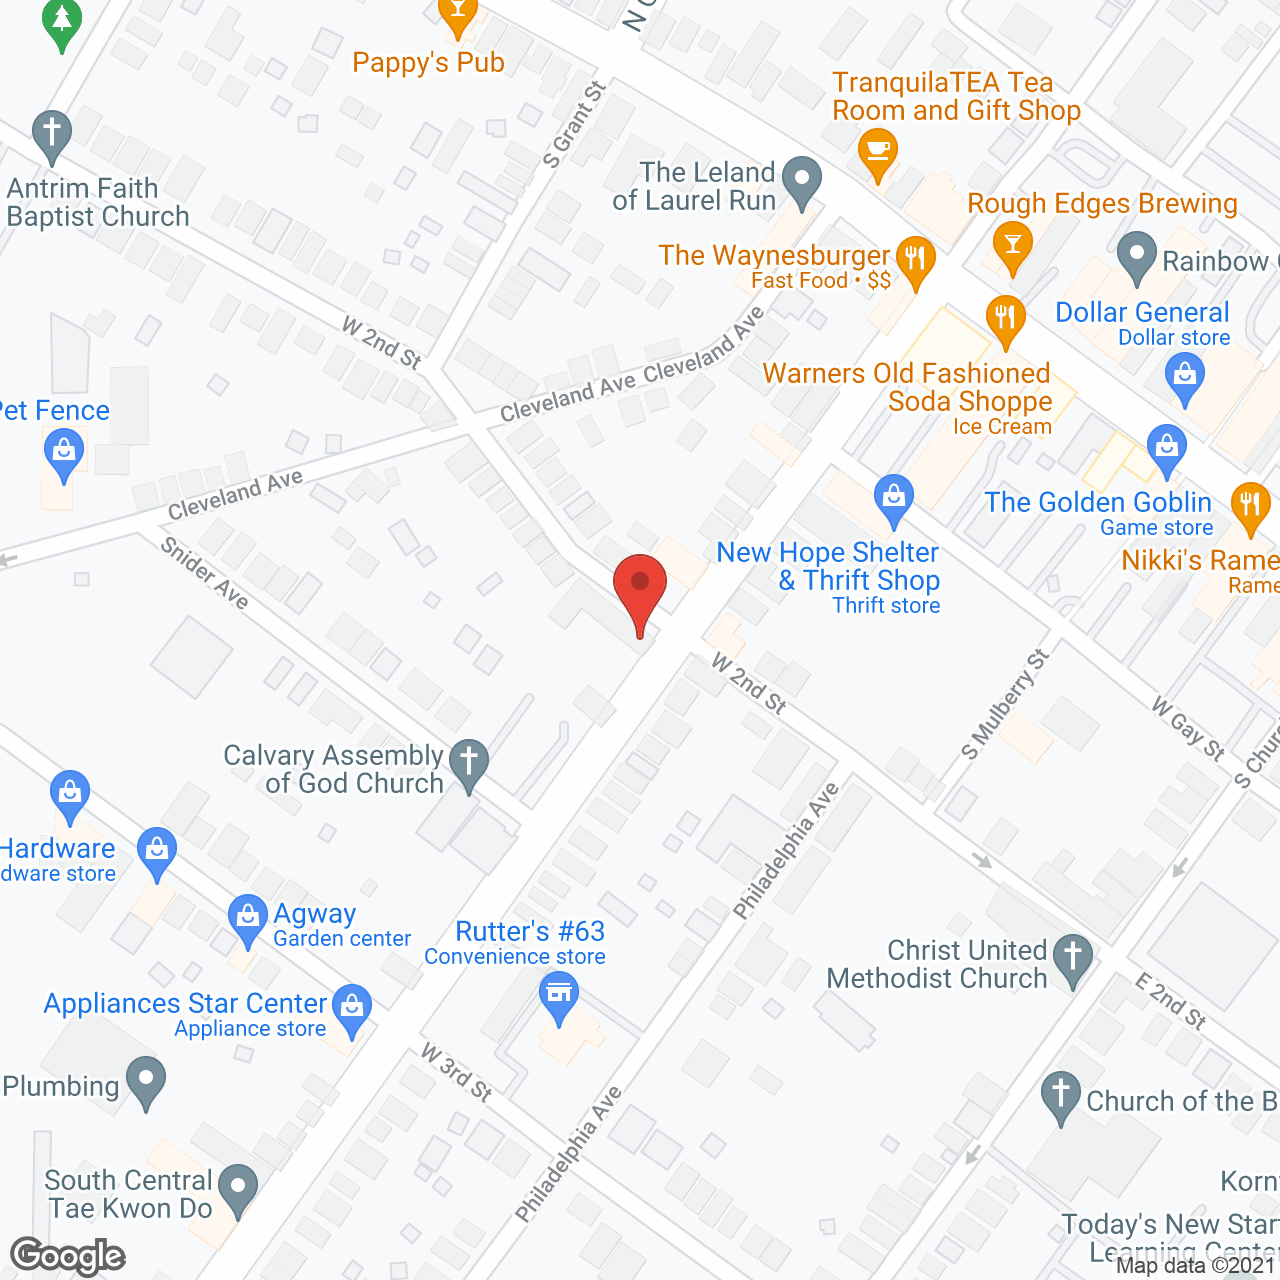 Hearthstone Retirement Home in google map